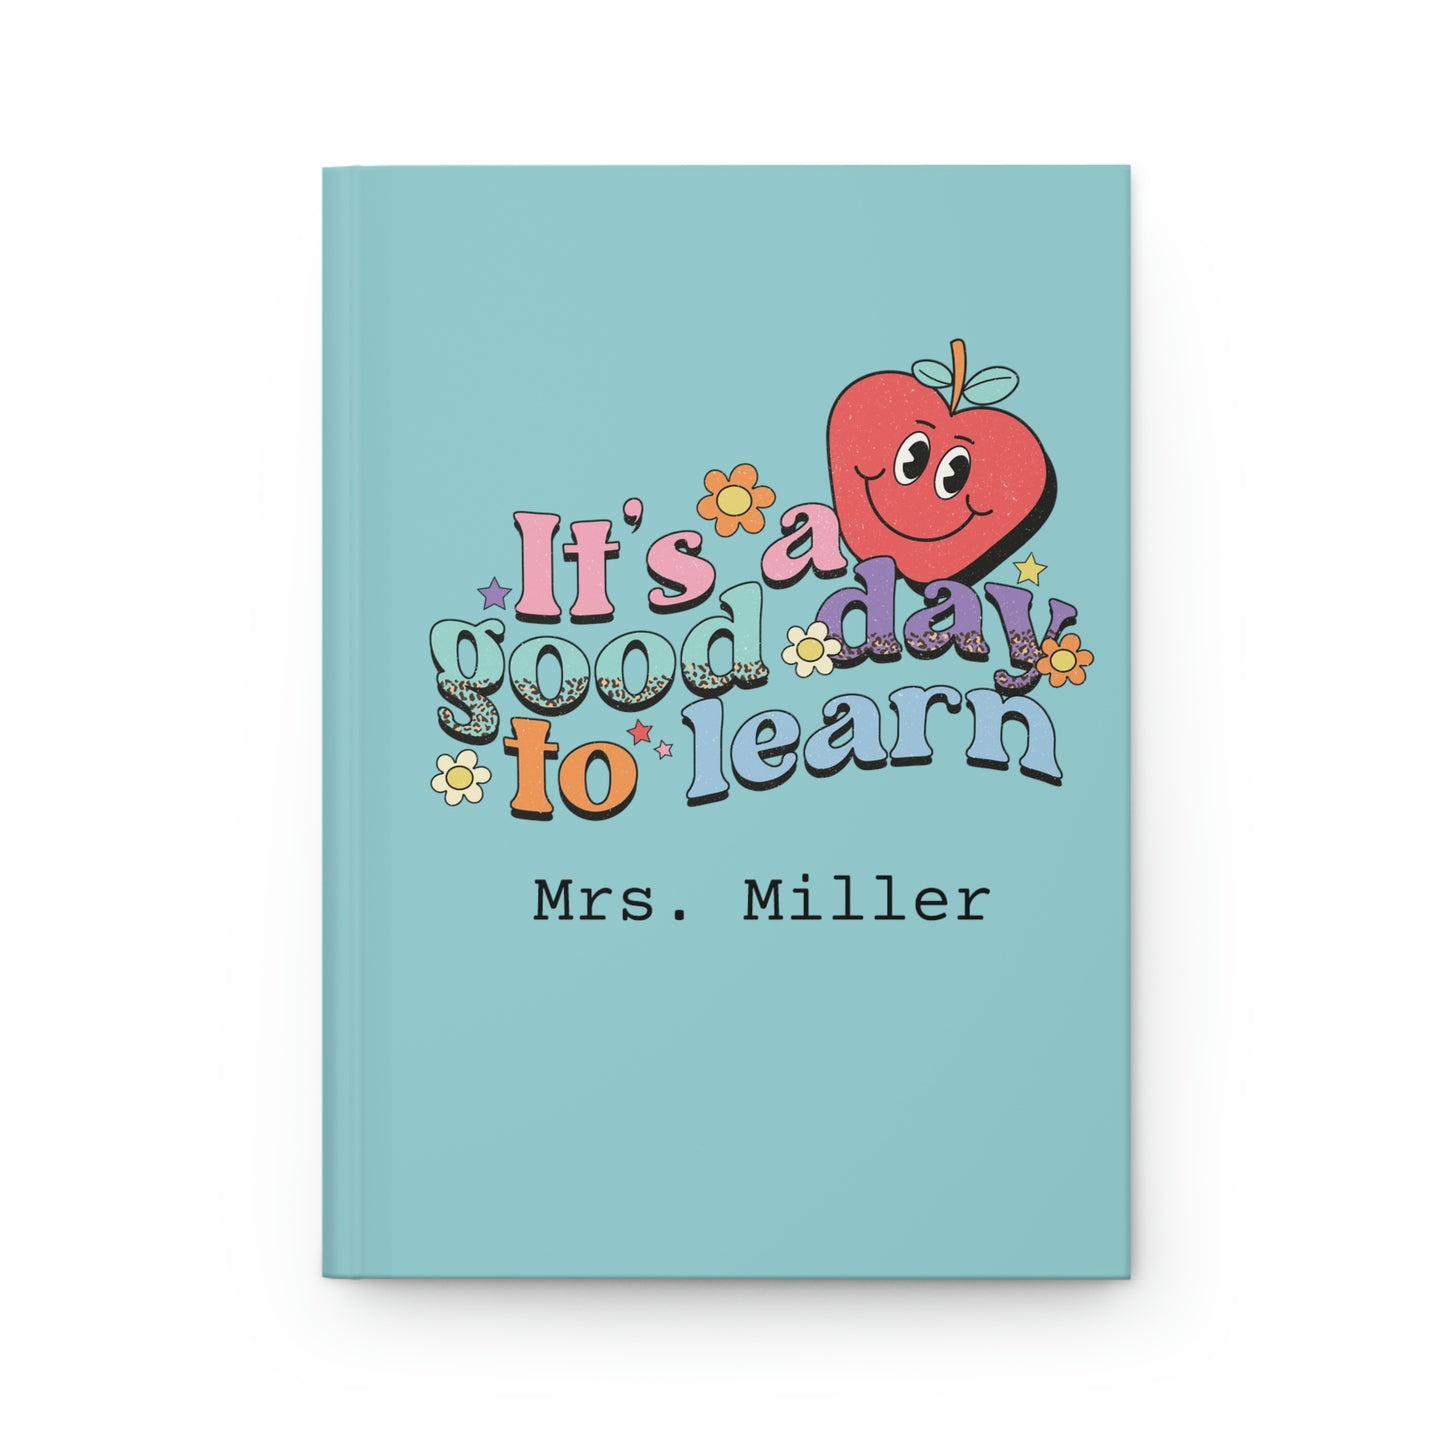 Its A Good Day To Learn - Personalized Teacher Book